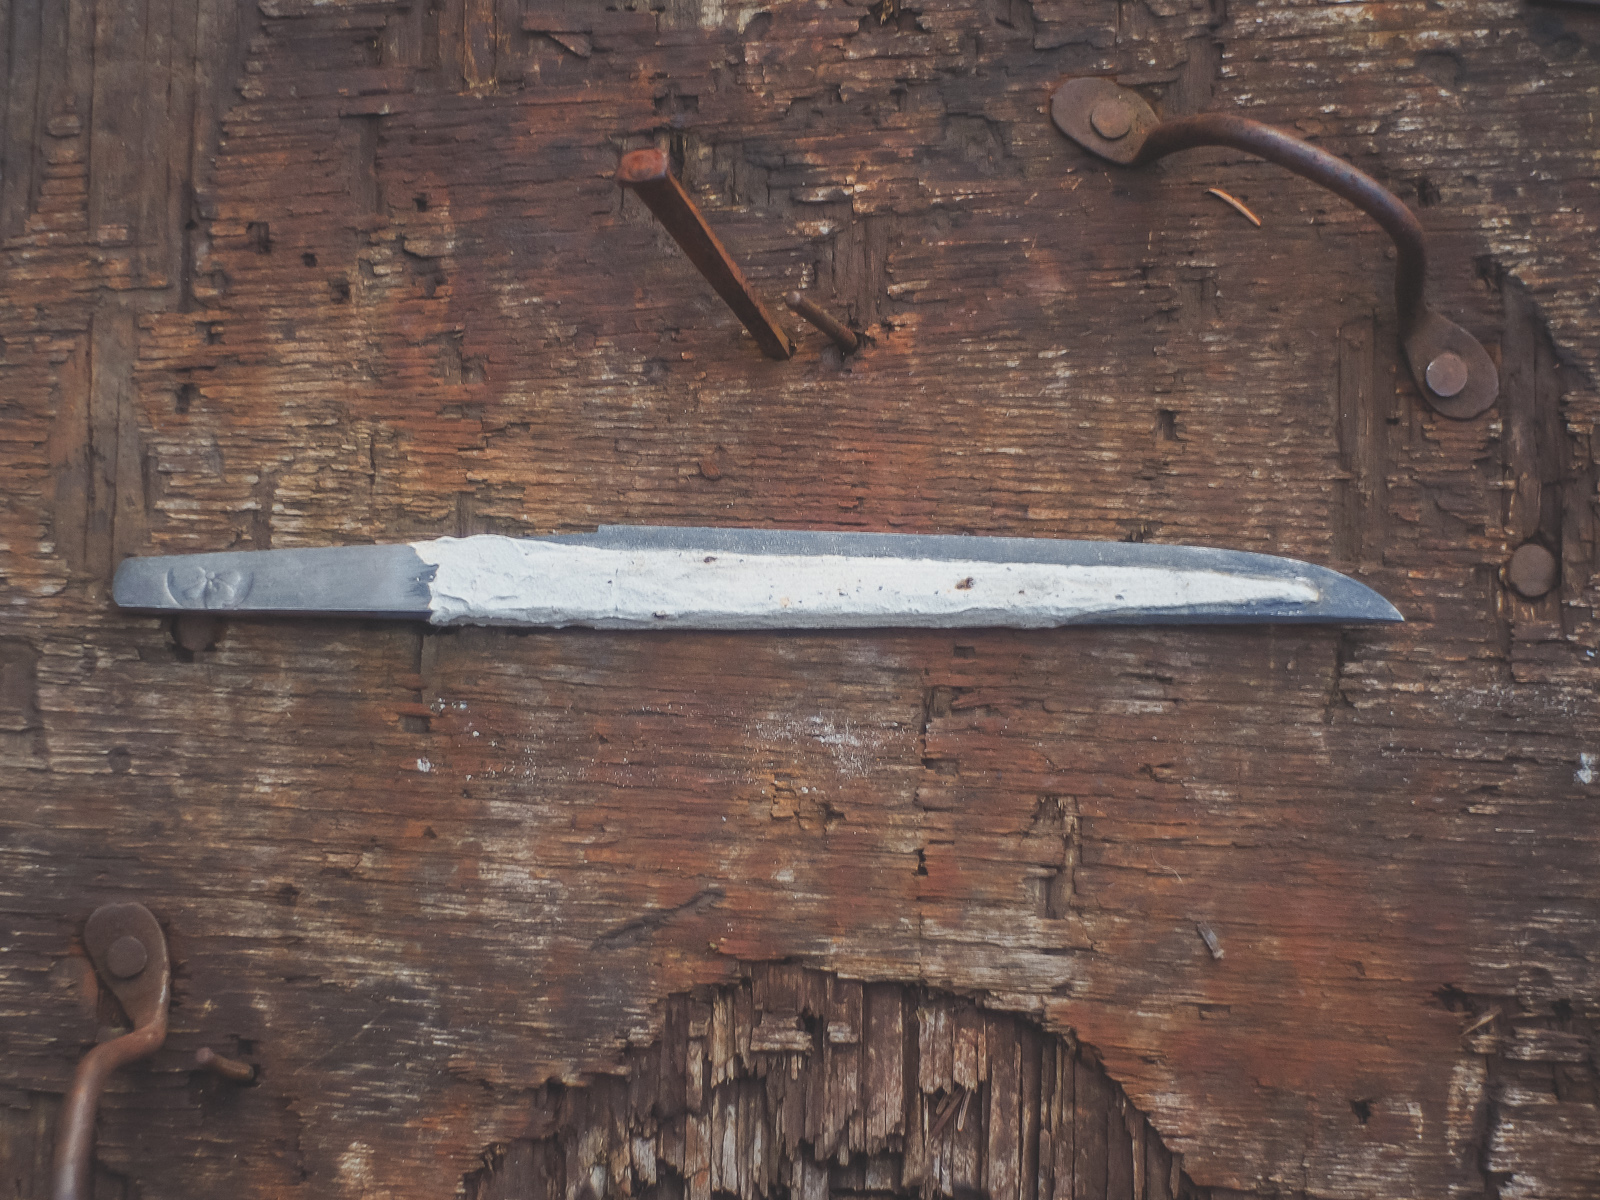 Island Blacksmith: Hand forged yoroidoshi tanto in shirasaya, made from reclaimed and natural materials using traditional techniques